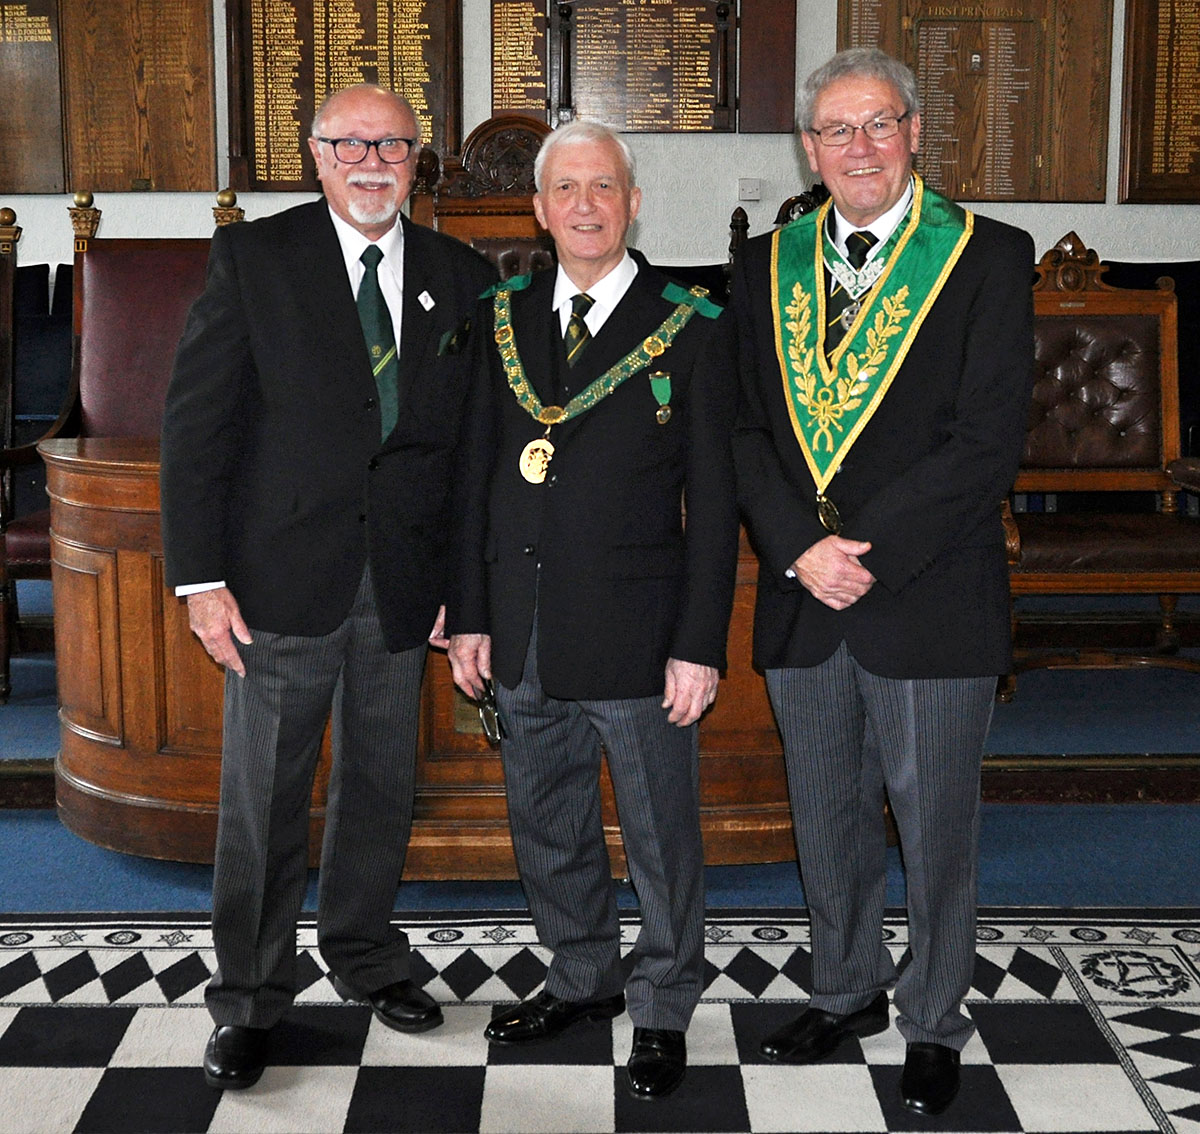  Annual District Grand Council Meeting for the District of Kent